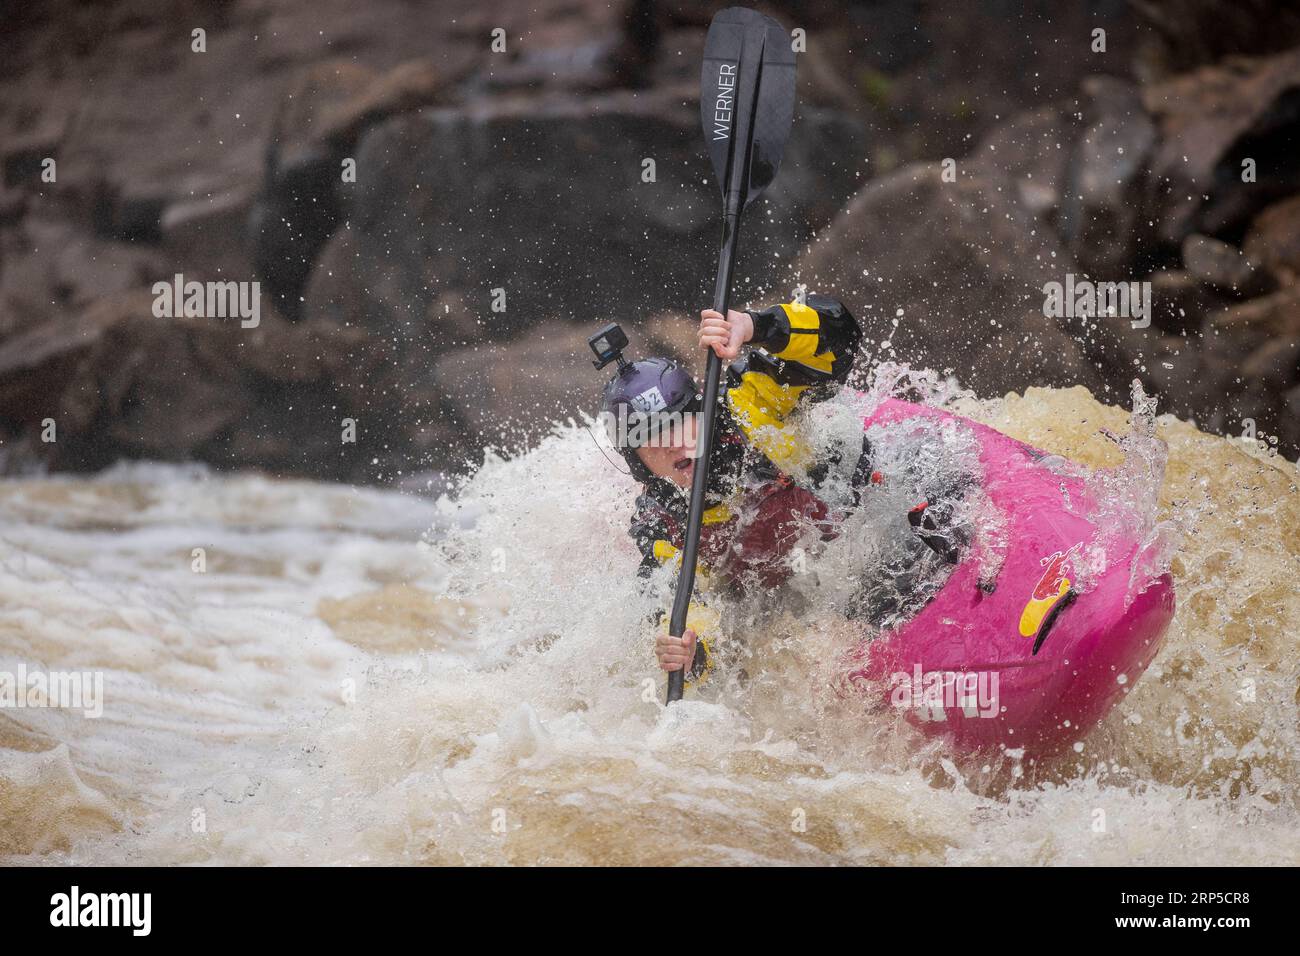 A competitor taking the rapids on the Raquette River outside of Colton, NY as part of the Whitewater Monarch of New York Race Series Stock Photo